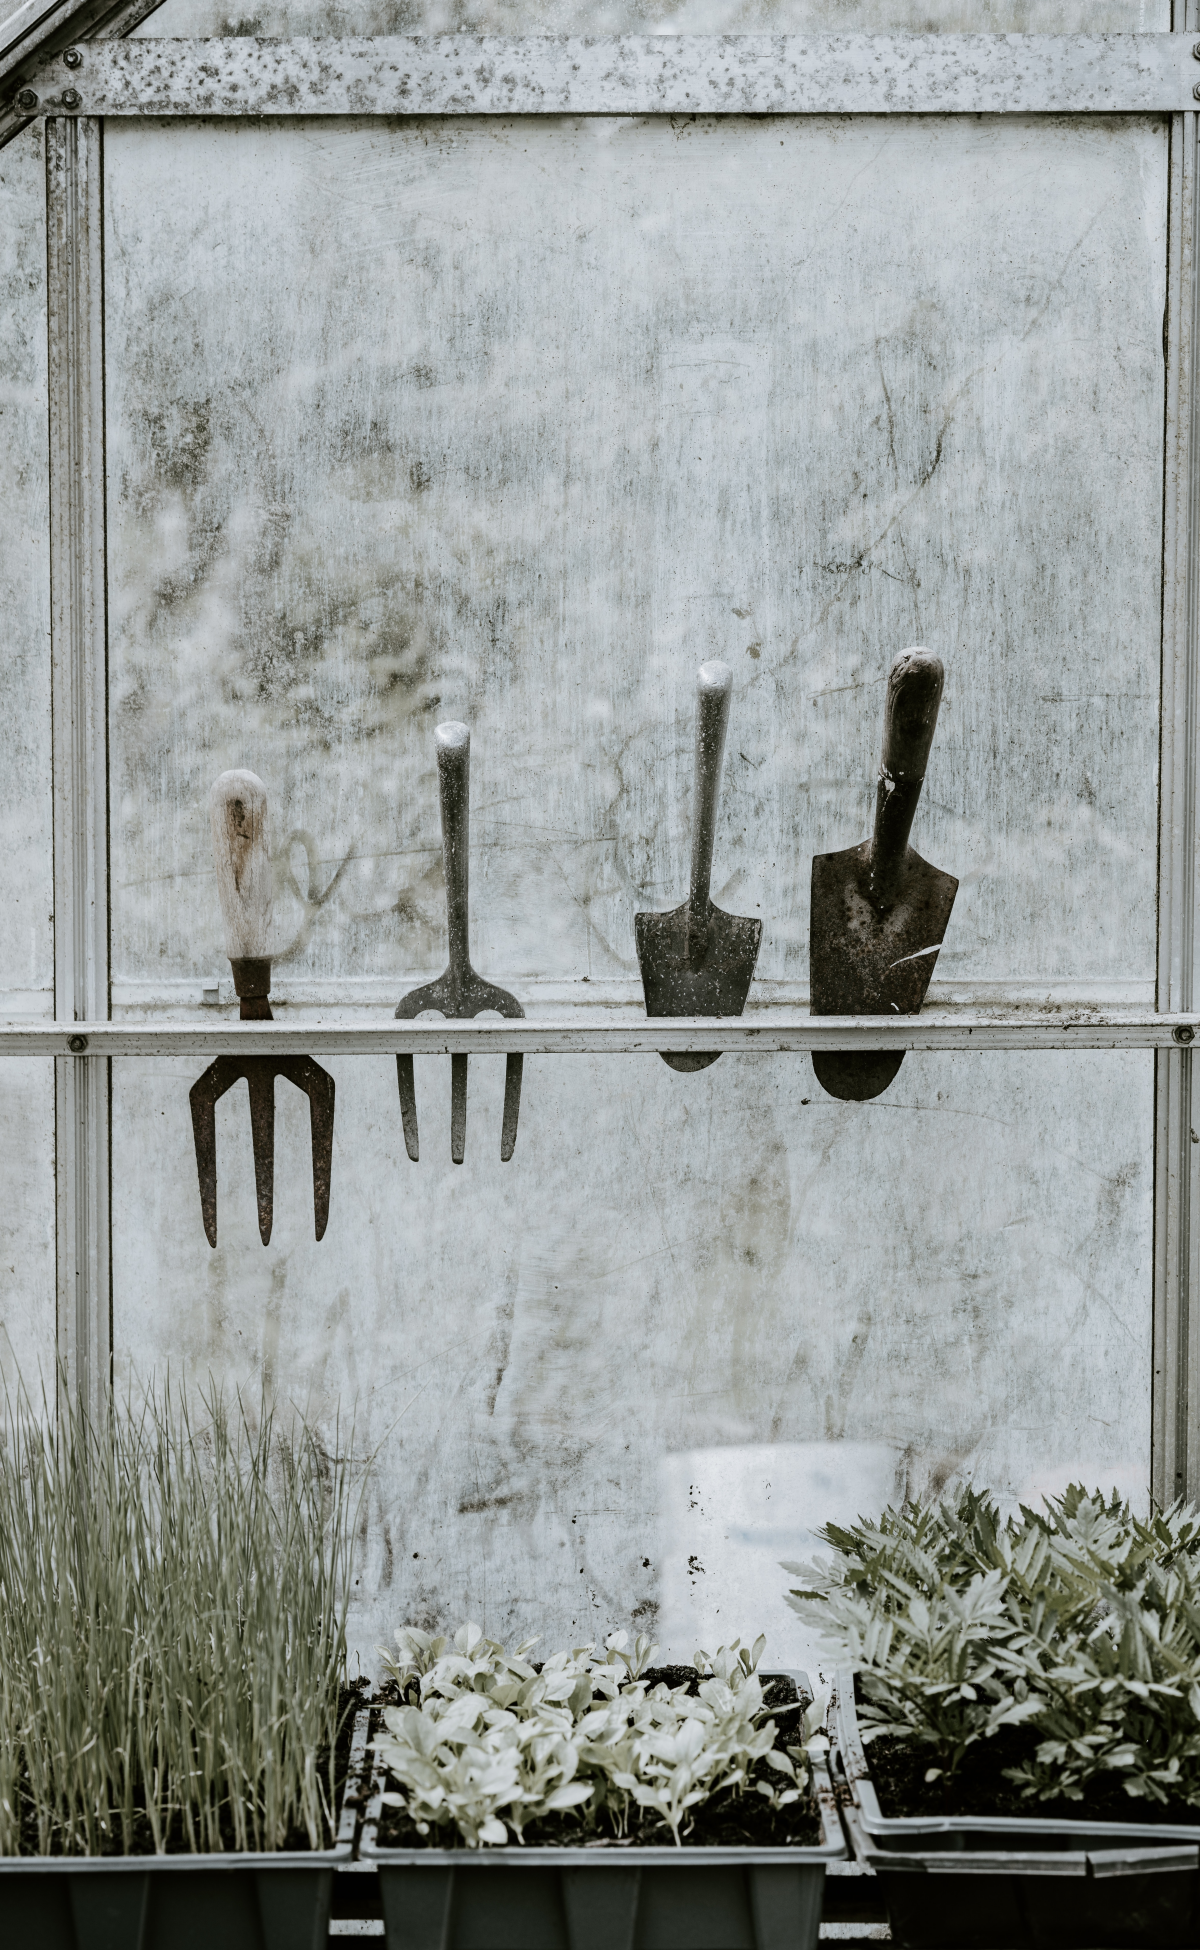 garden tools in shed